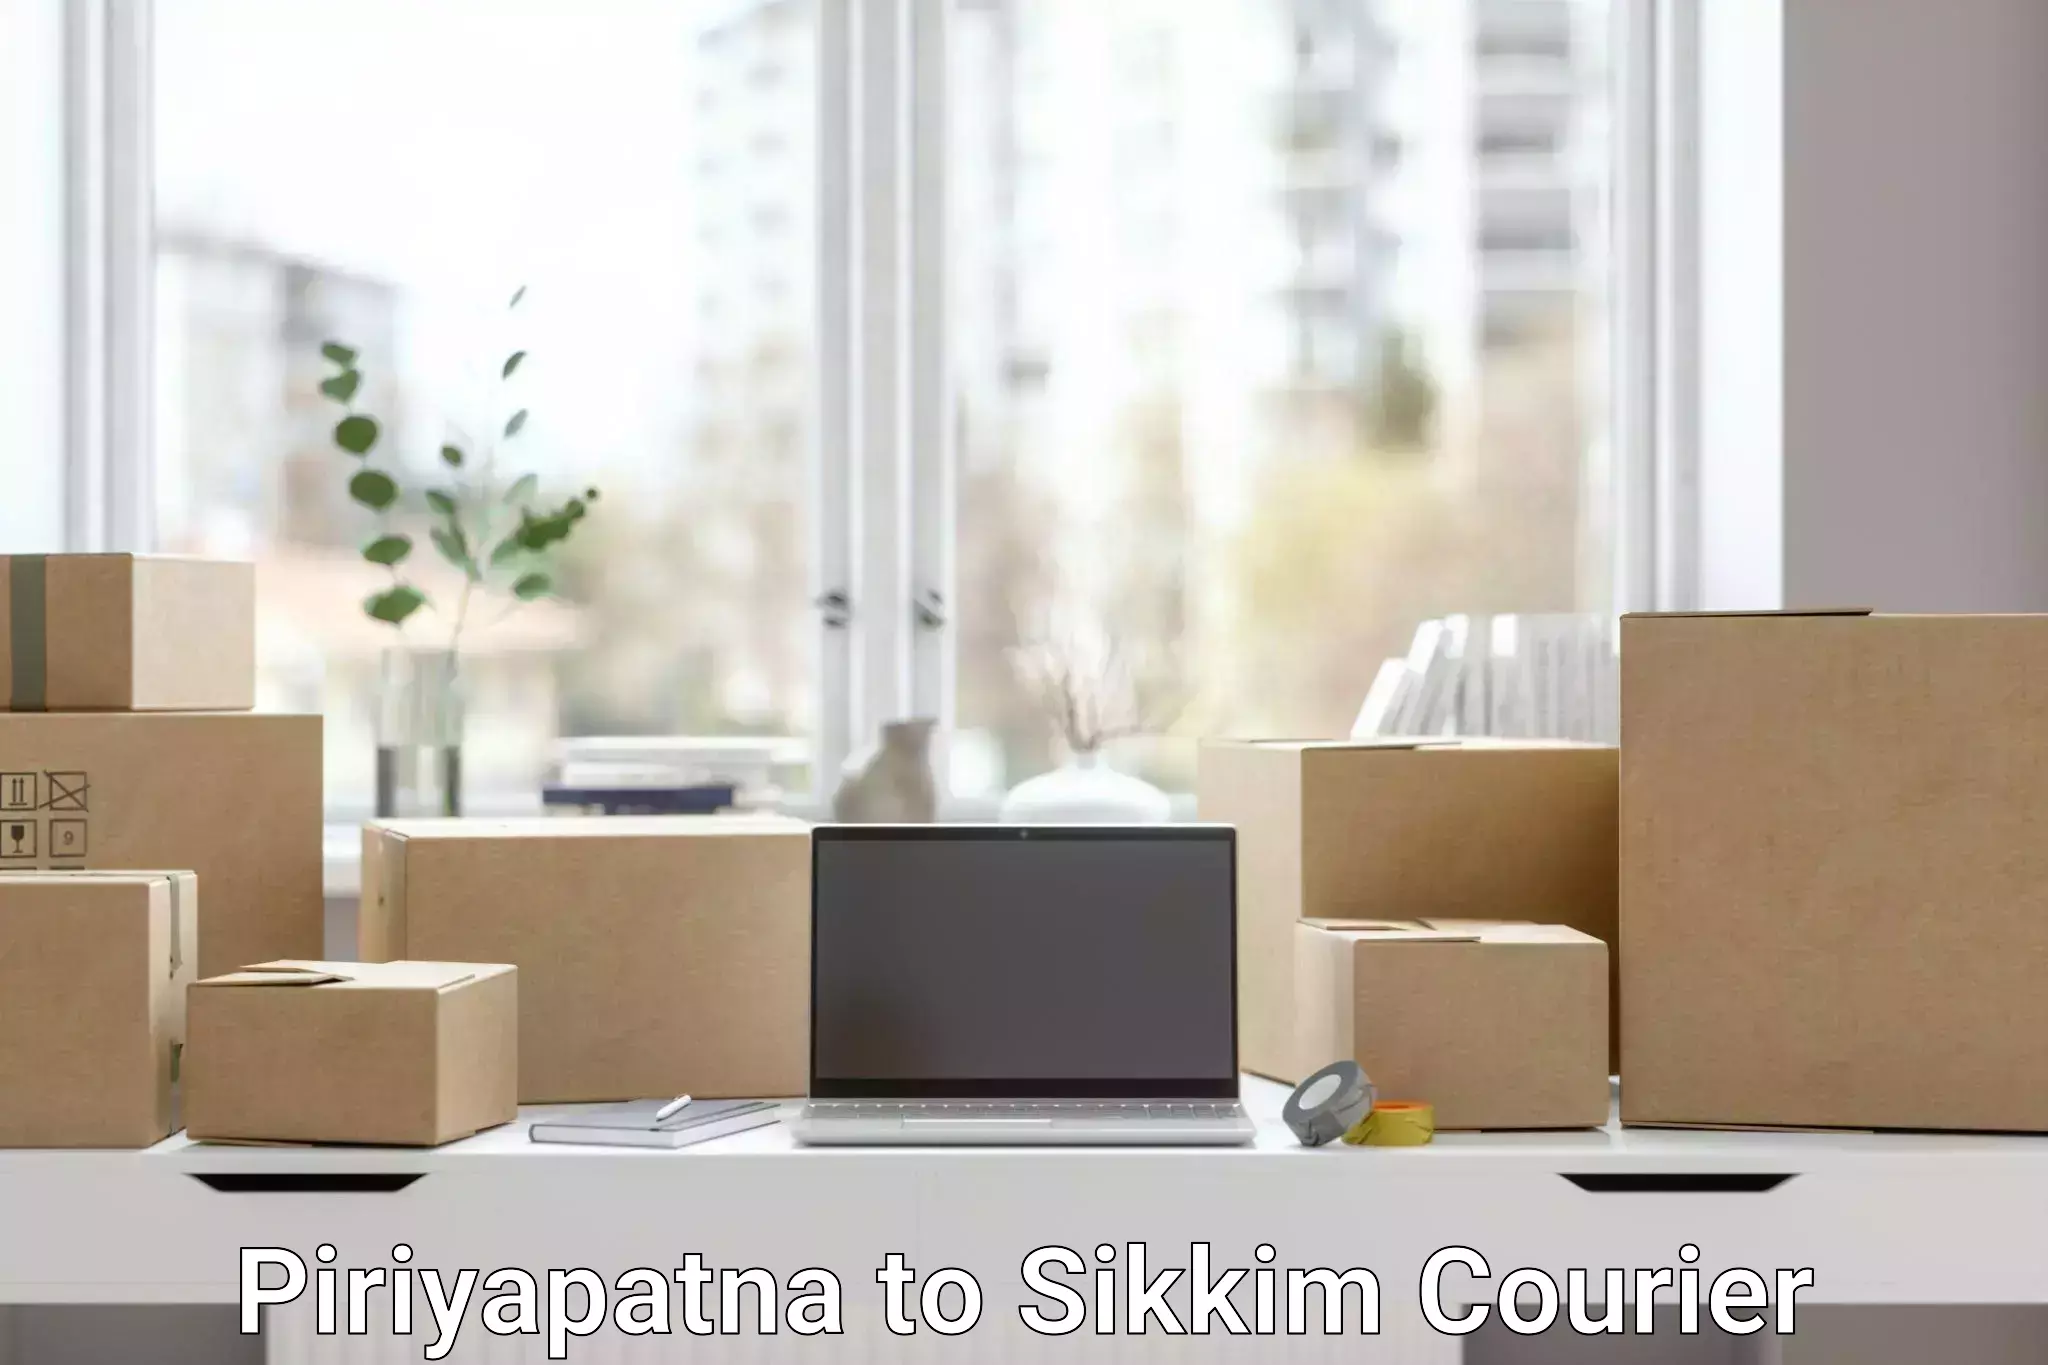 Sustainable courier practices Piriyapatna to South Sikkim